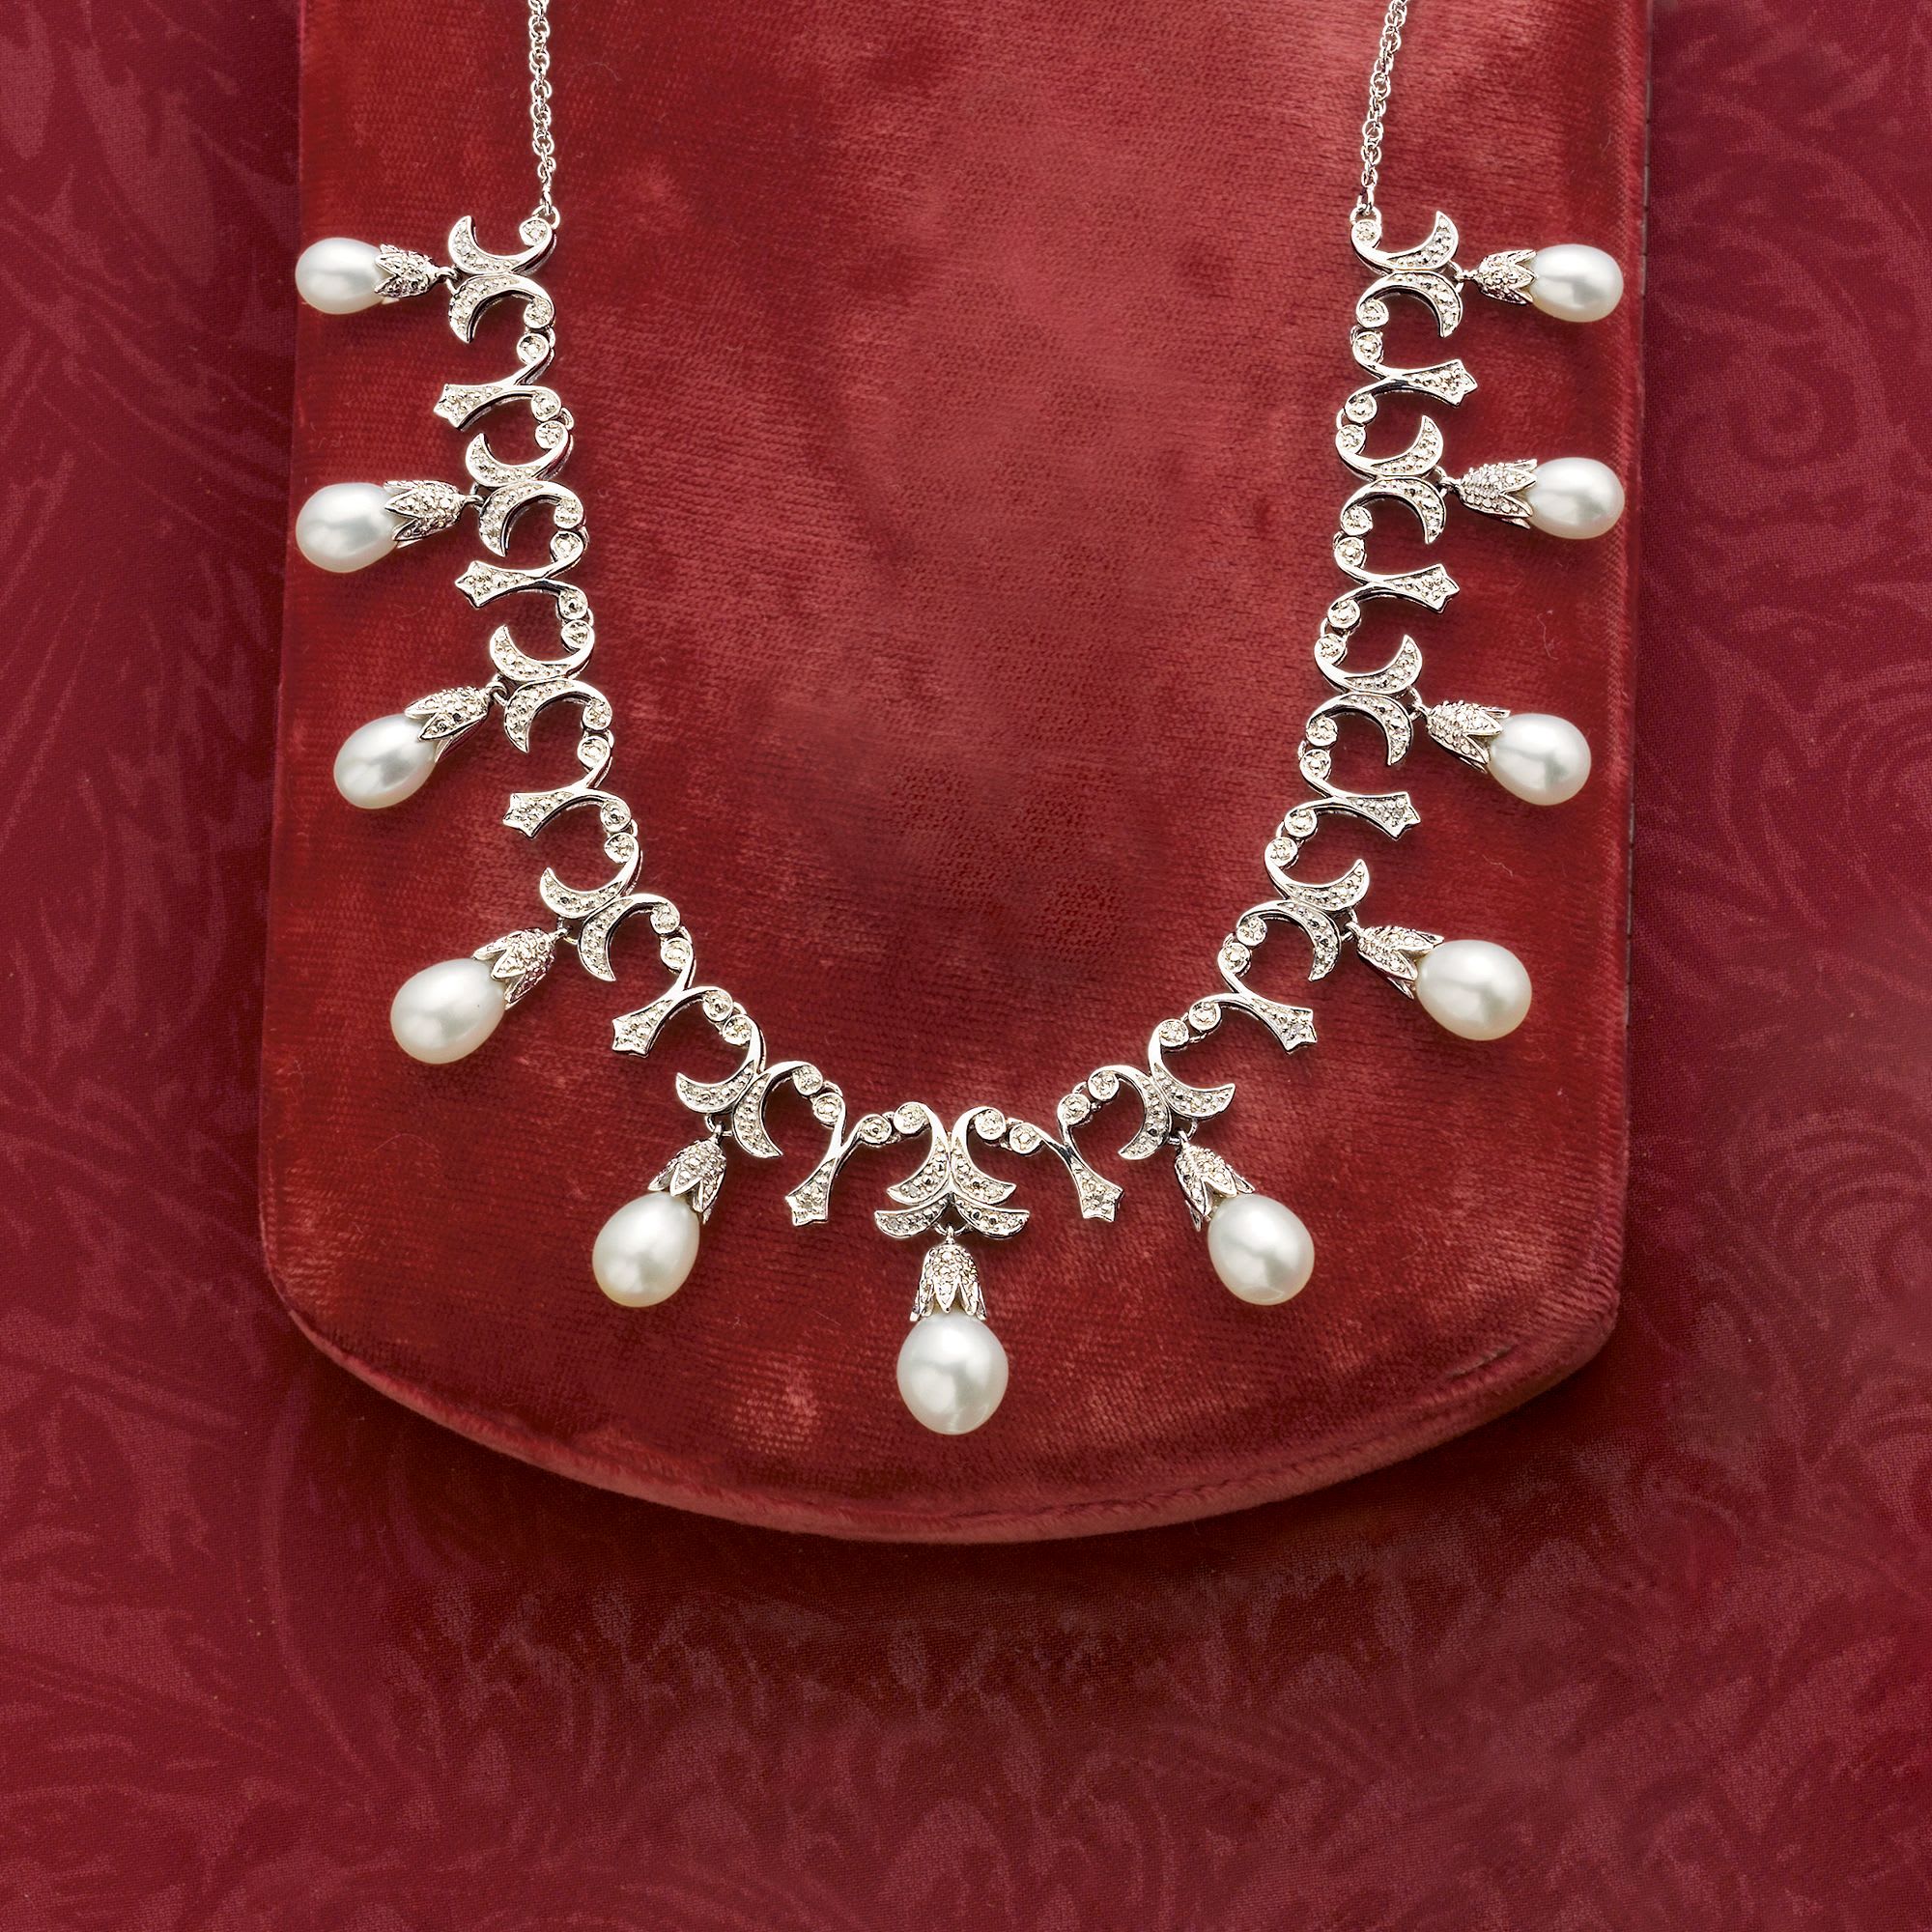 Ross-Simons | in Cultured .20 Pearl ct. Silver Diamond Necklace 6-9mm t.w. Sterling and